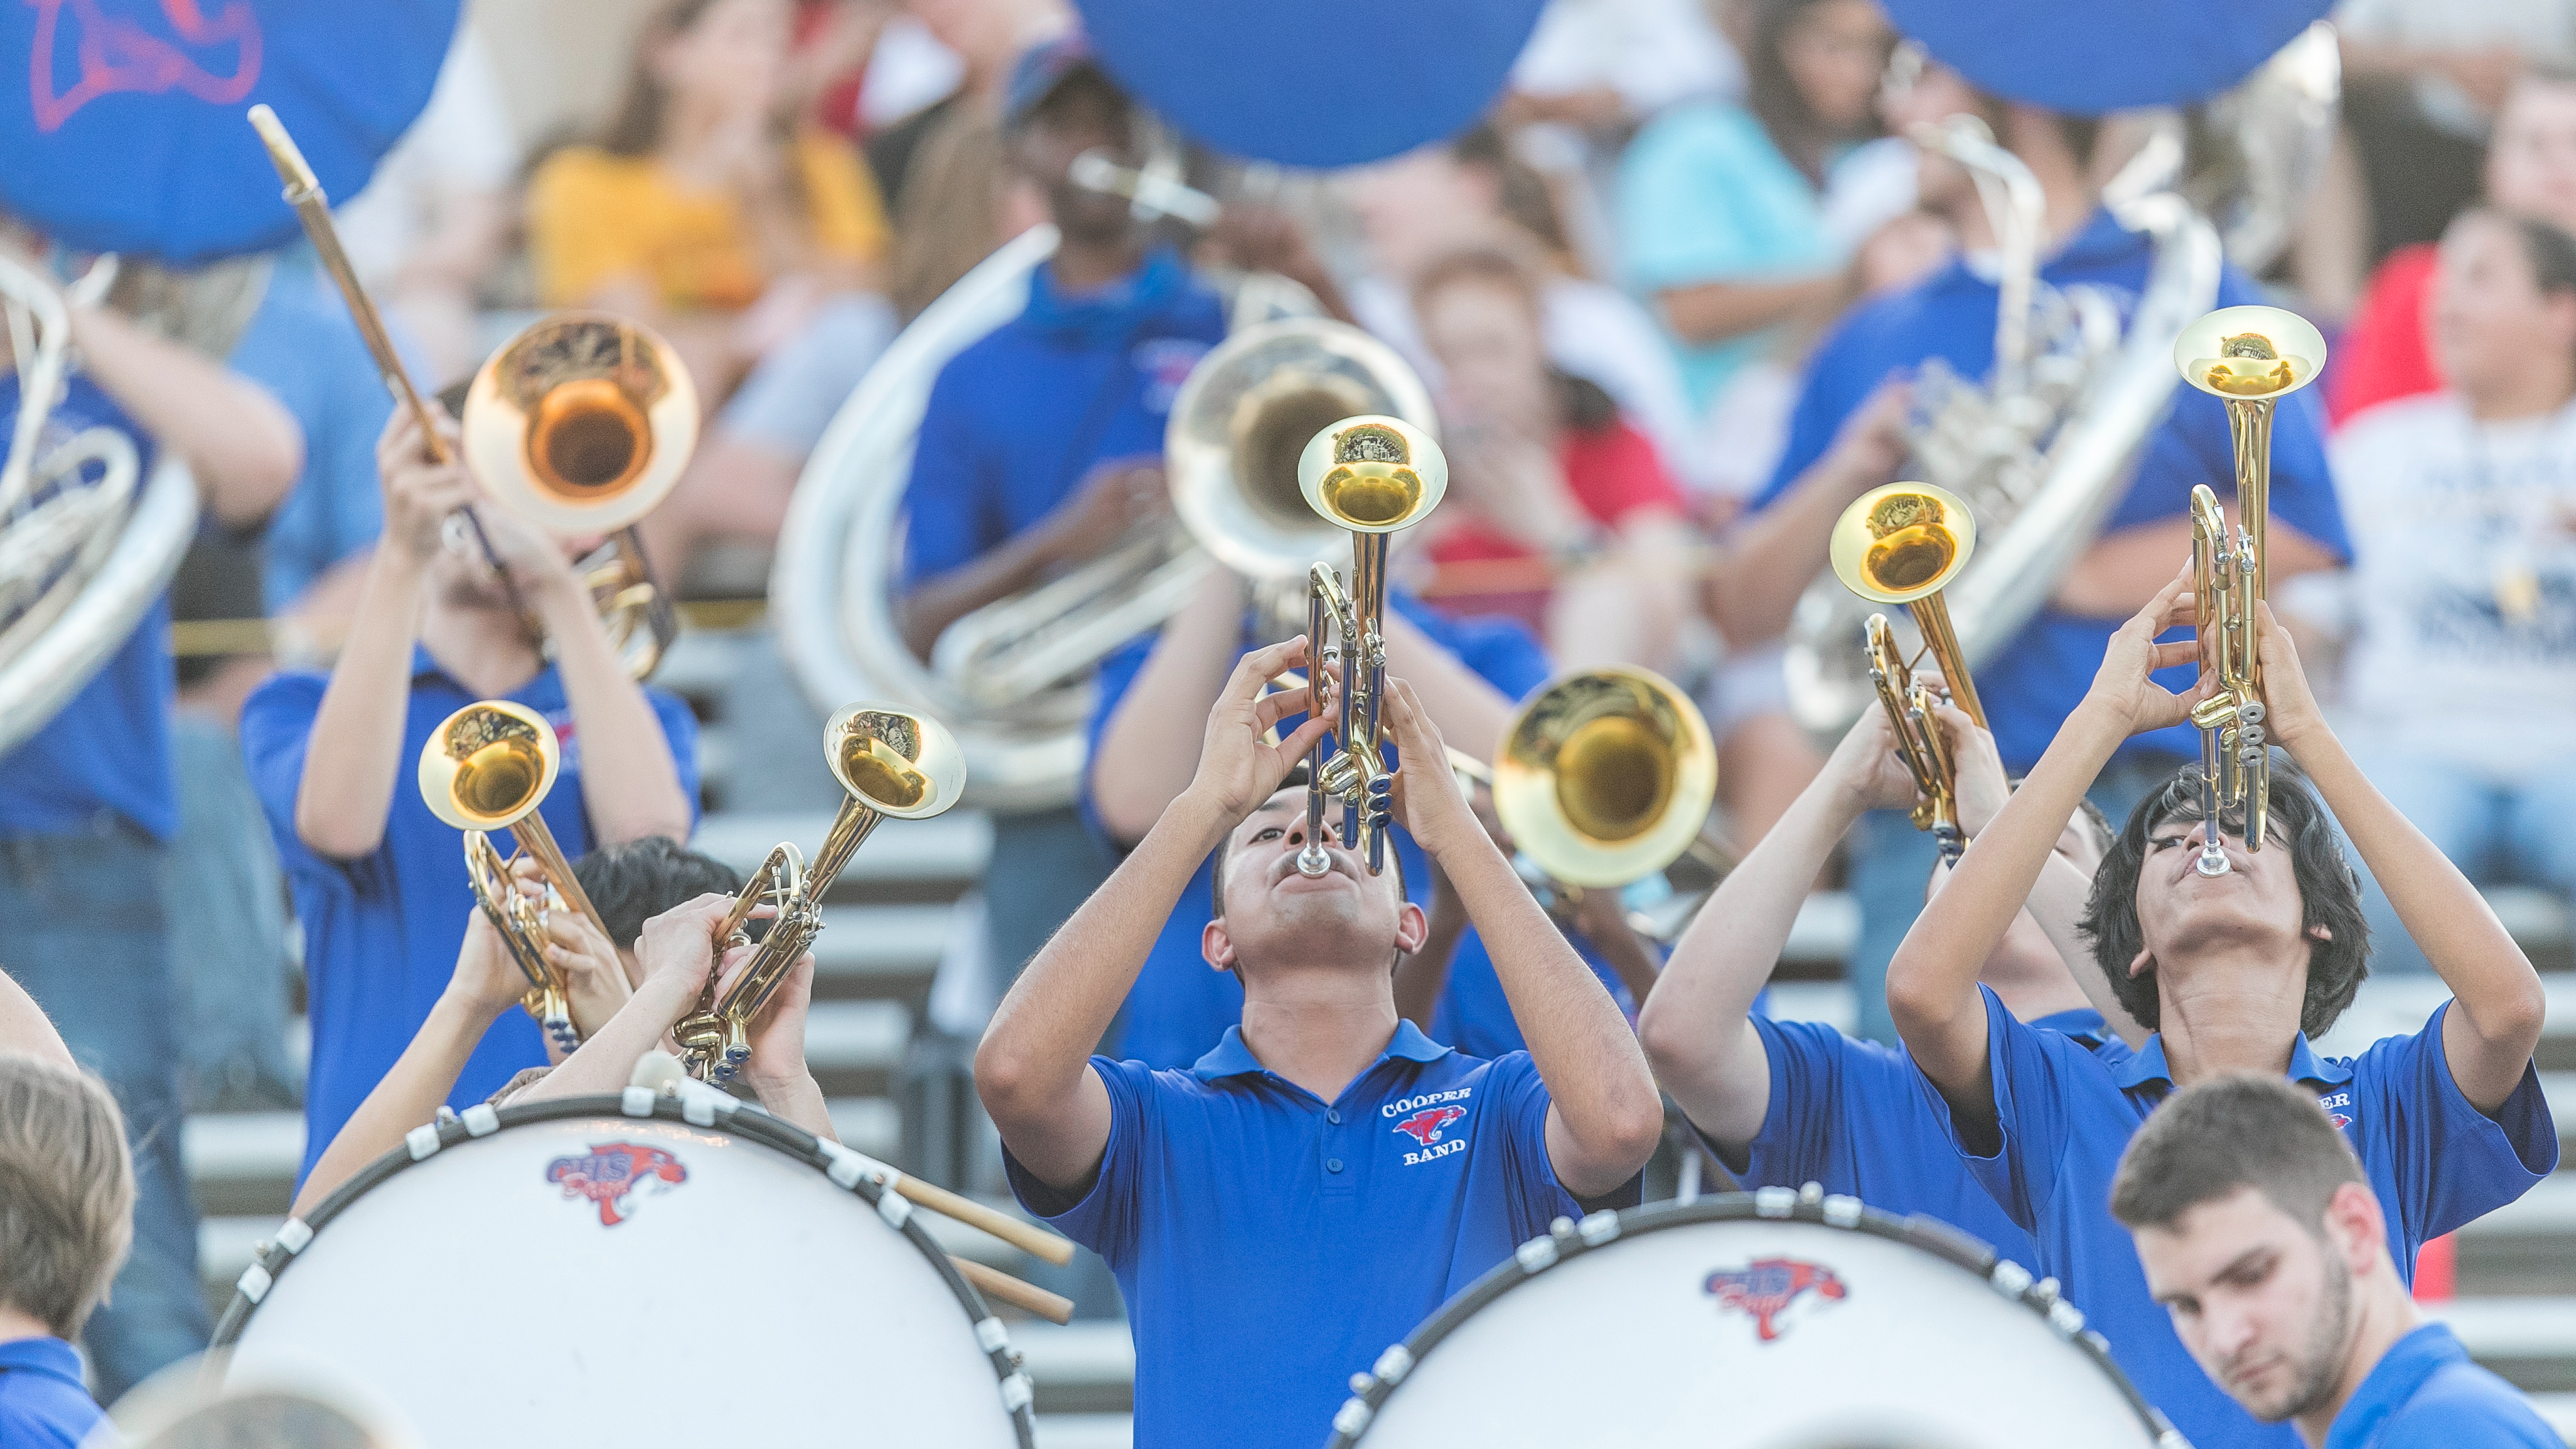 High School band students play their instruments at a football game